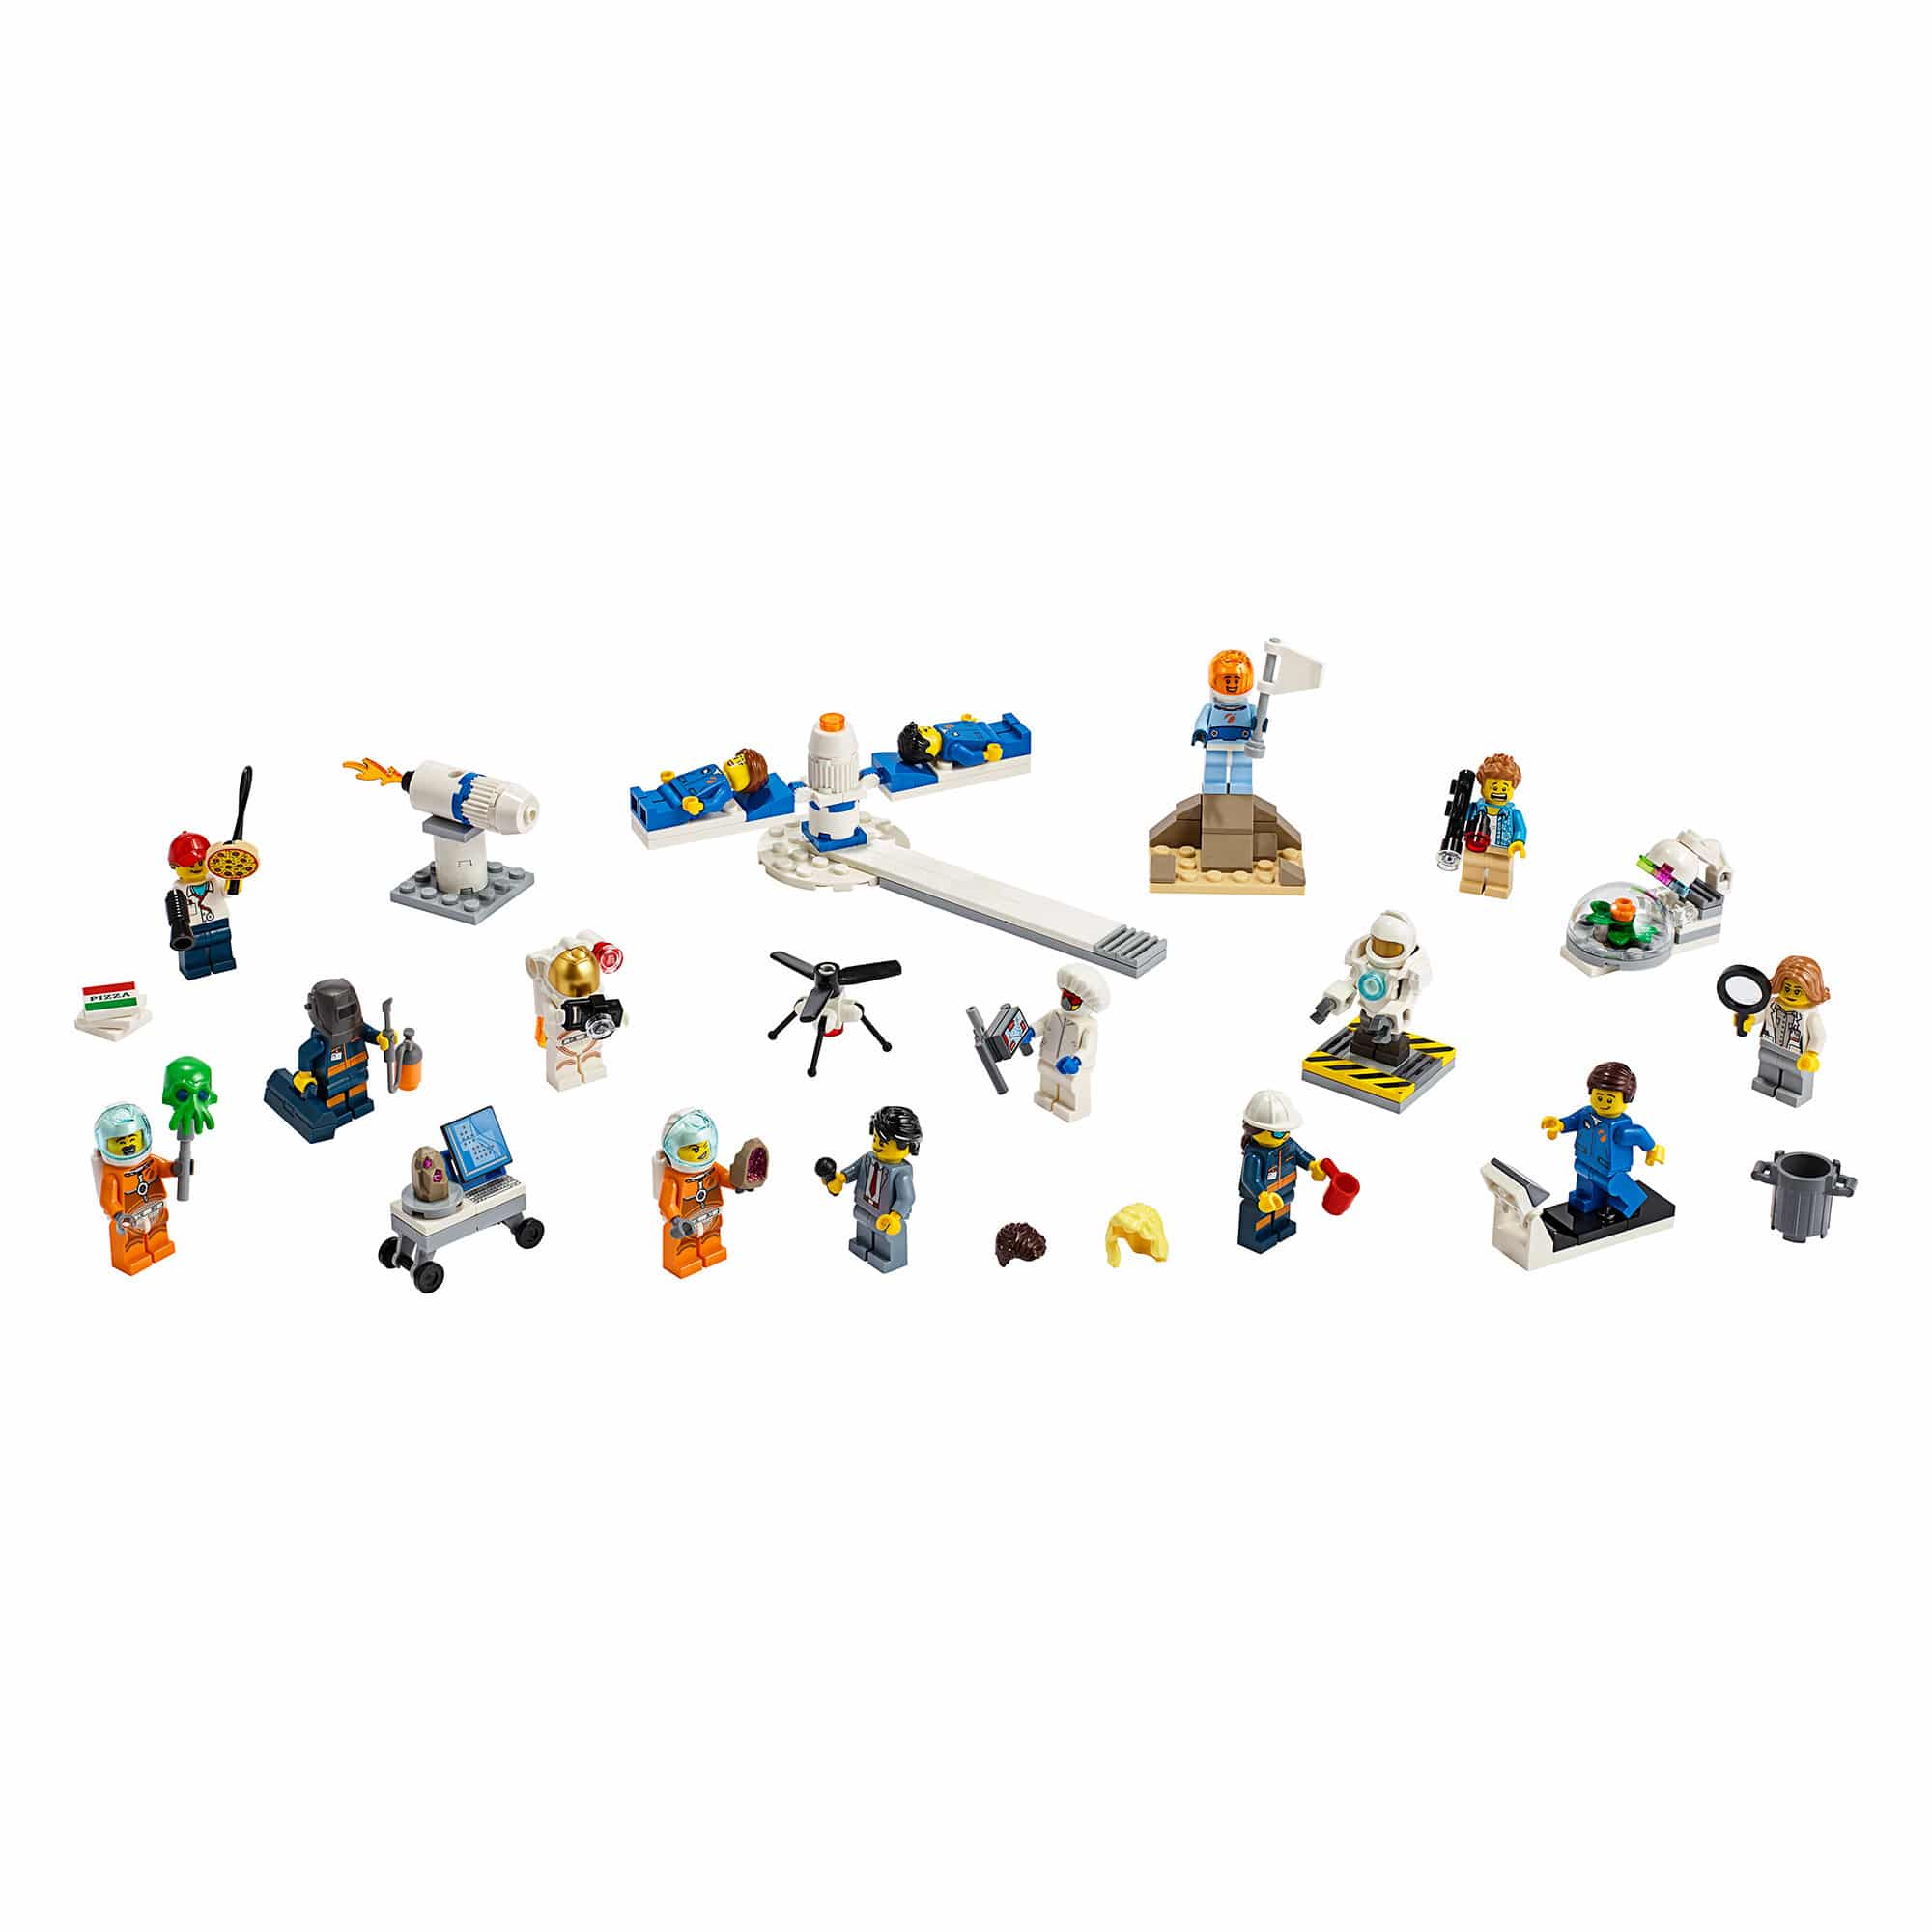 LEGO City - 60230 People Pack - Space Research and Development